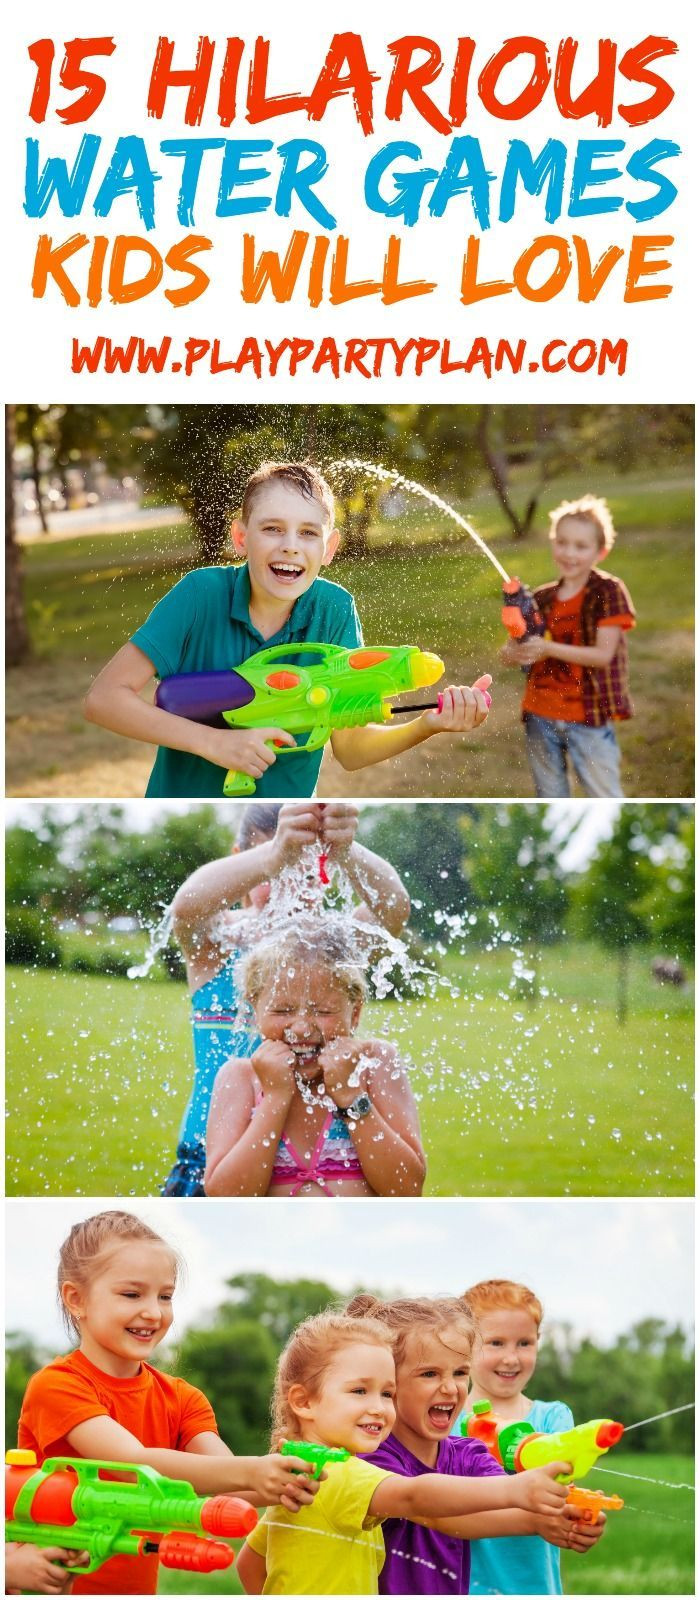 Backyard Water Party Ideas
 The Ultimate List of Water Games for Kids and Adults